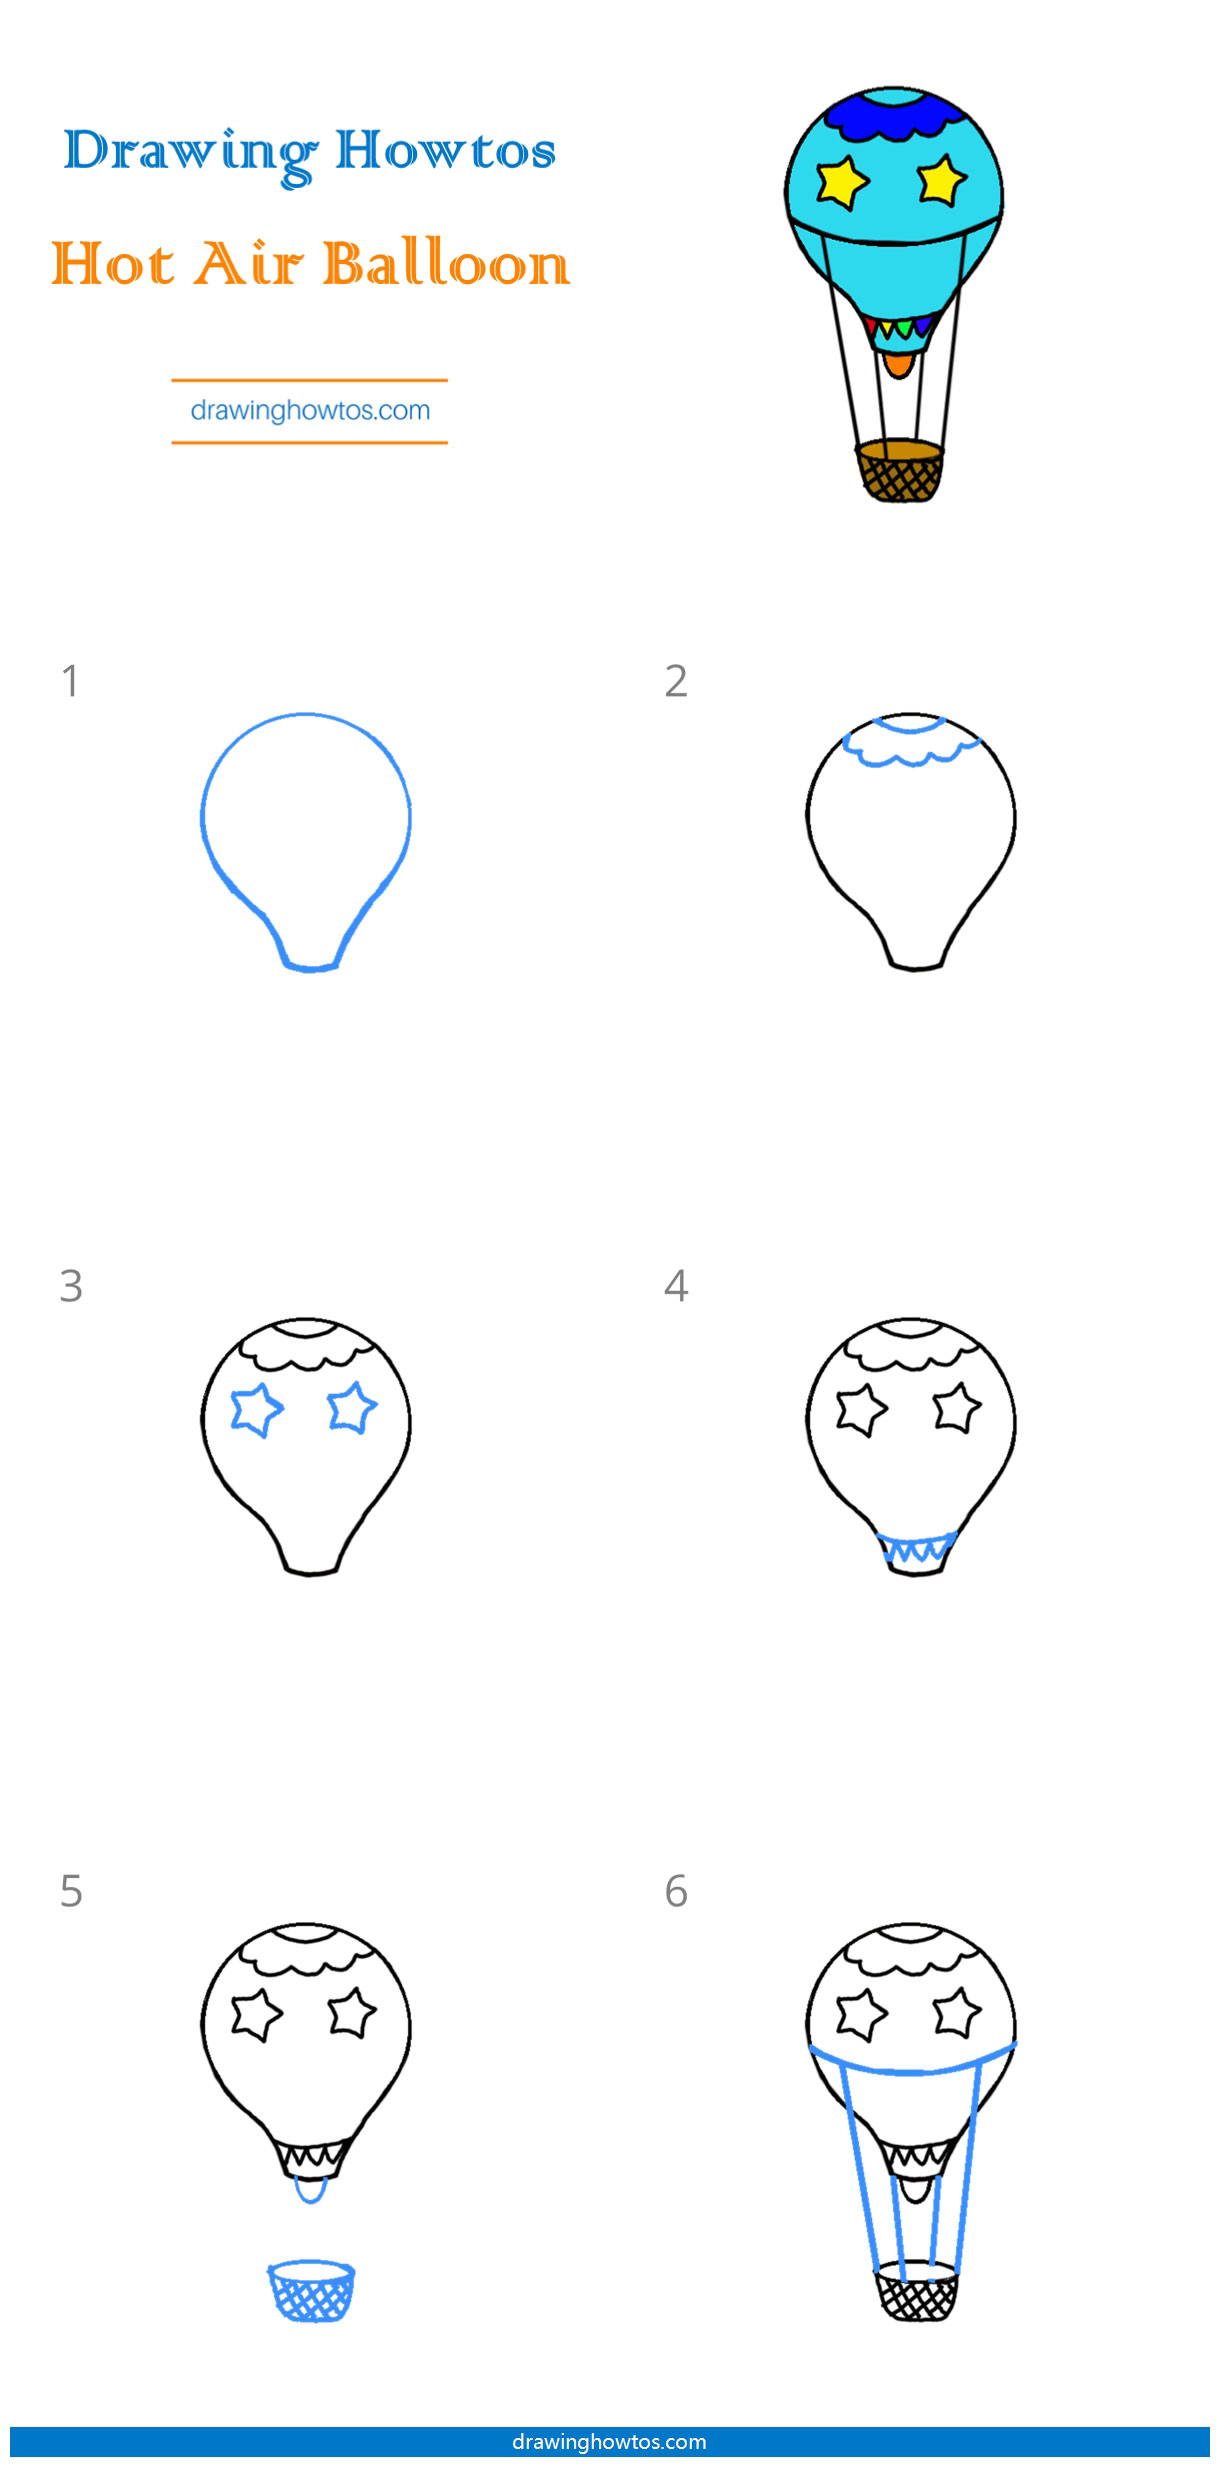 How to Draw a Hot Air Balloon Step by Step